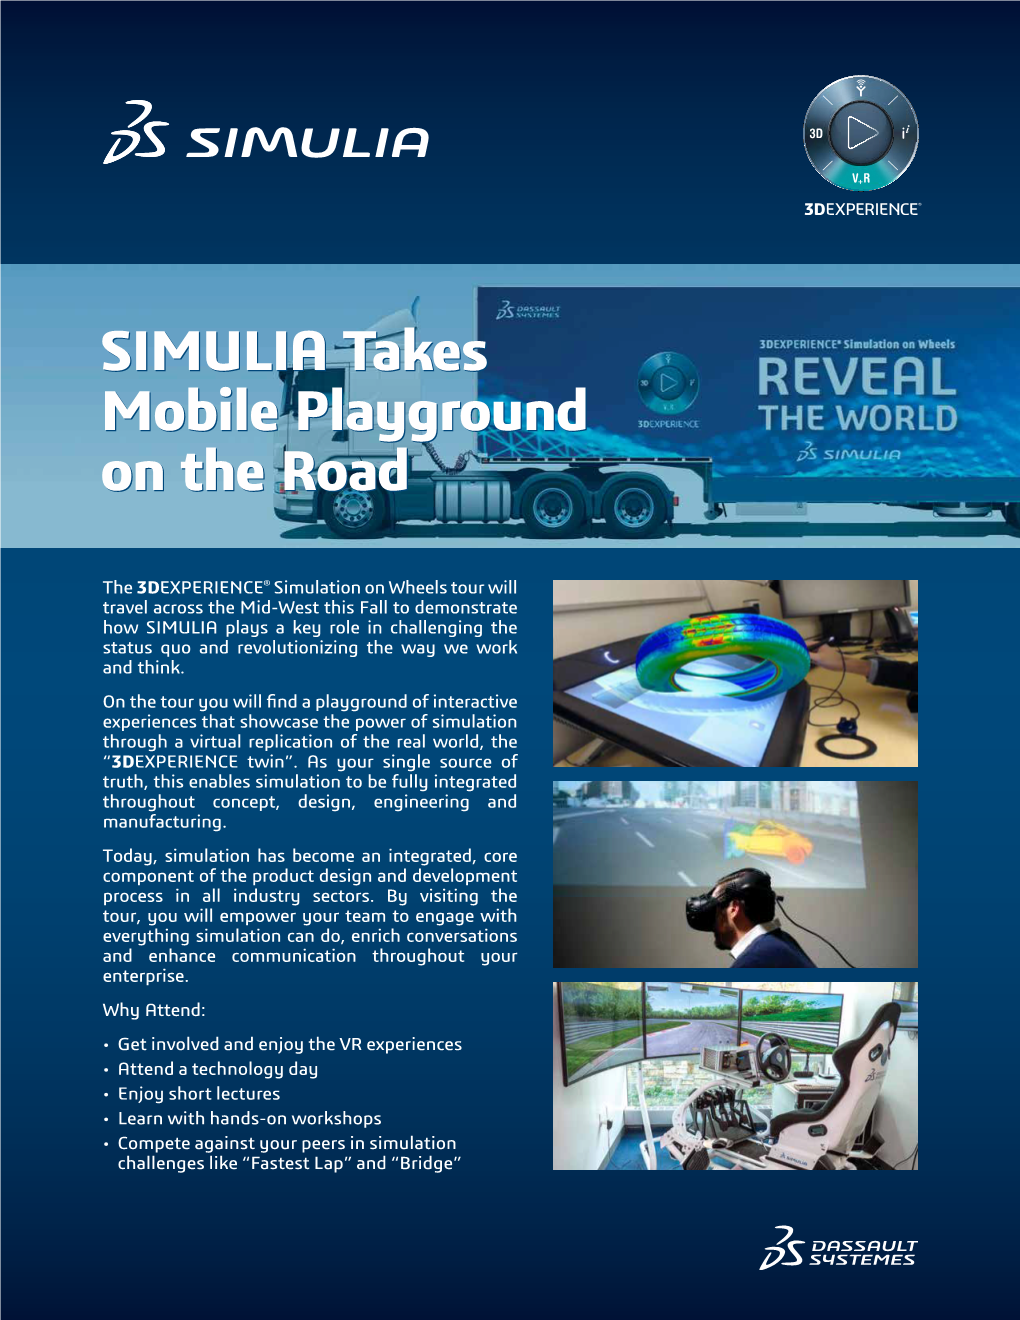 SIMULIA Takes Mobile Playground on the Road